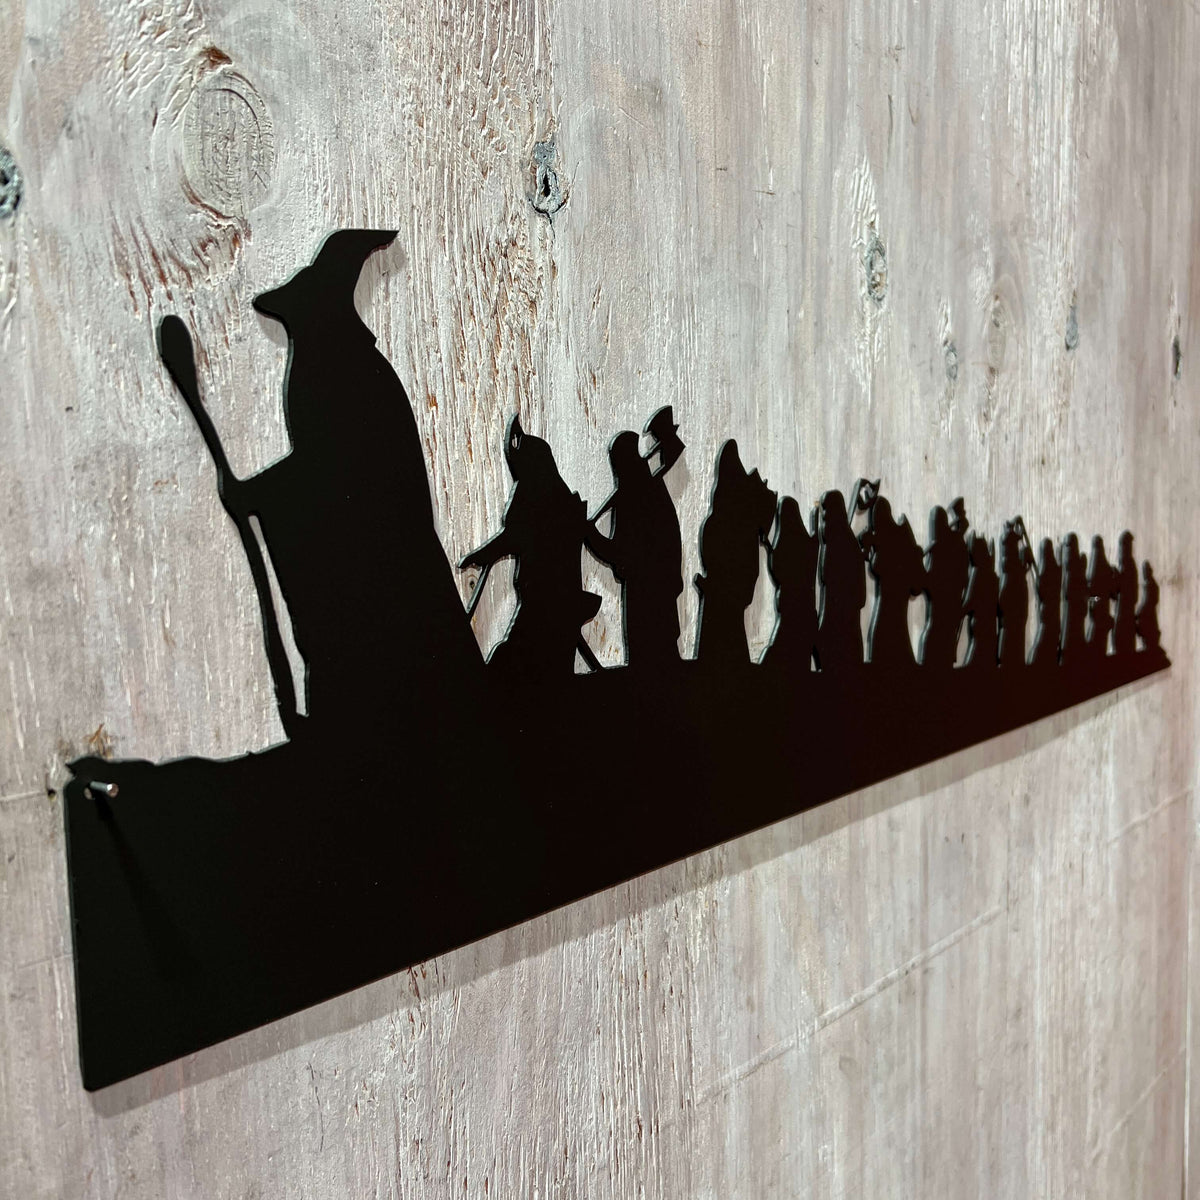 Lord of the Rings Hobbit Silhouette | Metal Wall Art | 23" | #LotR